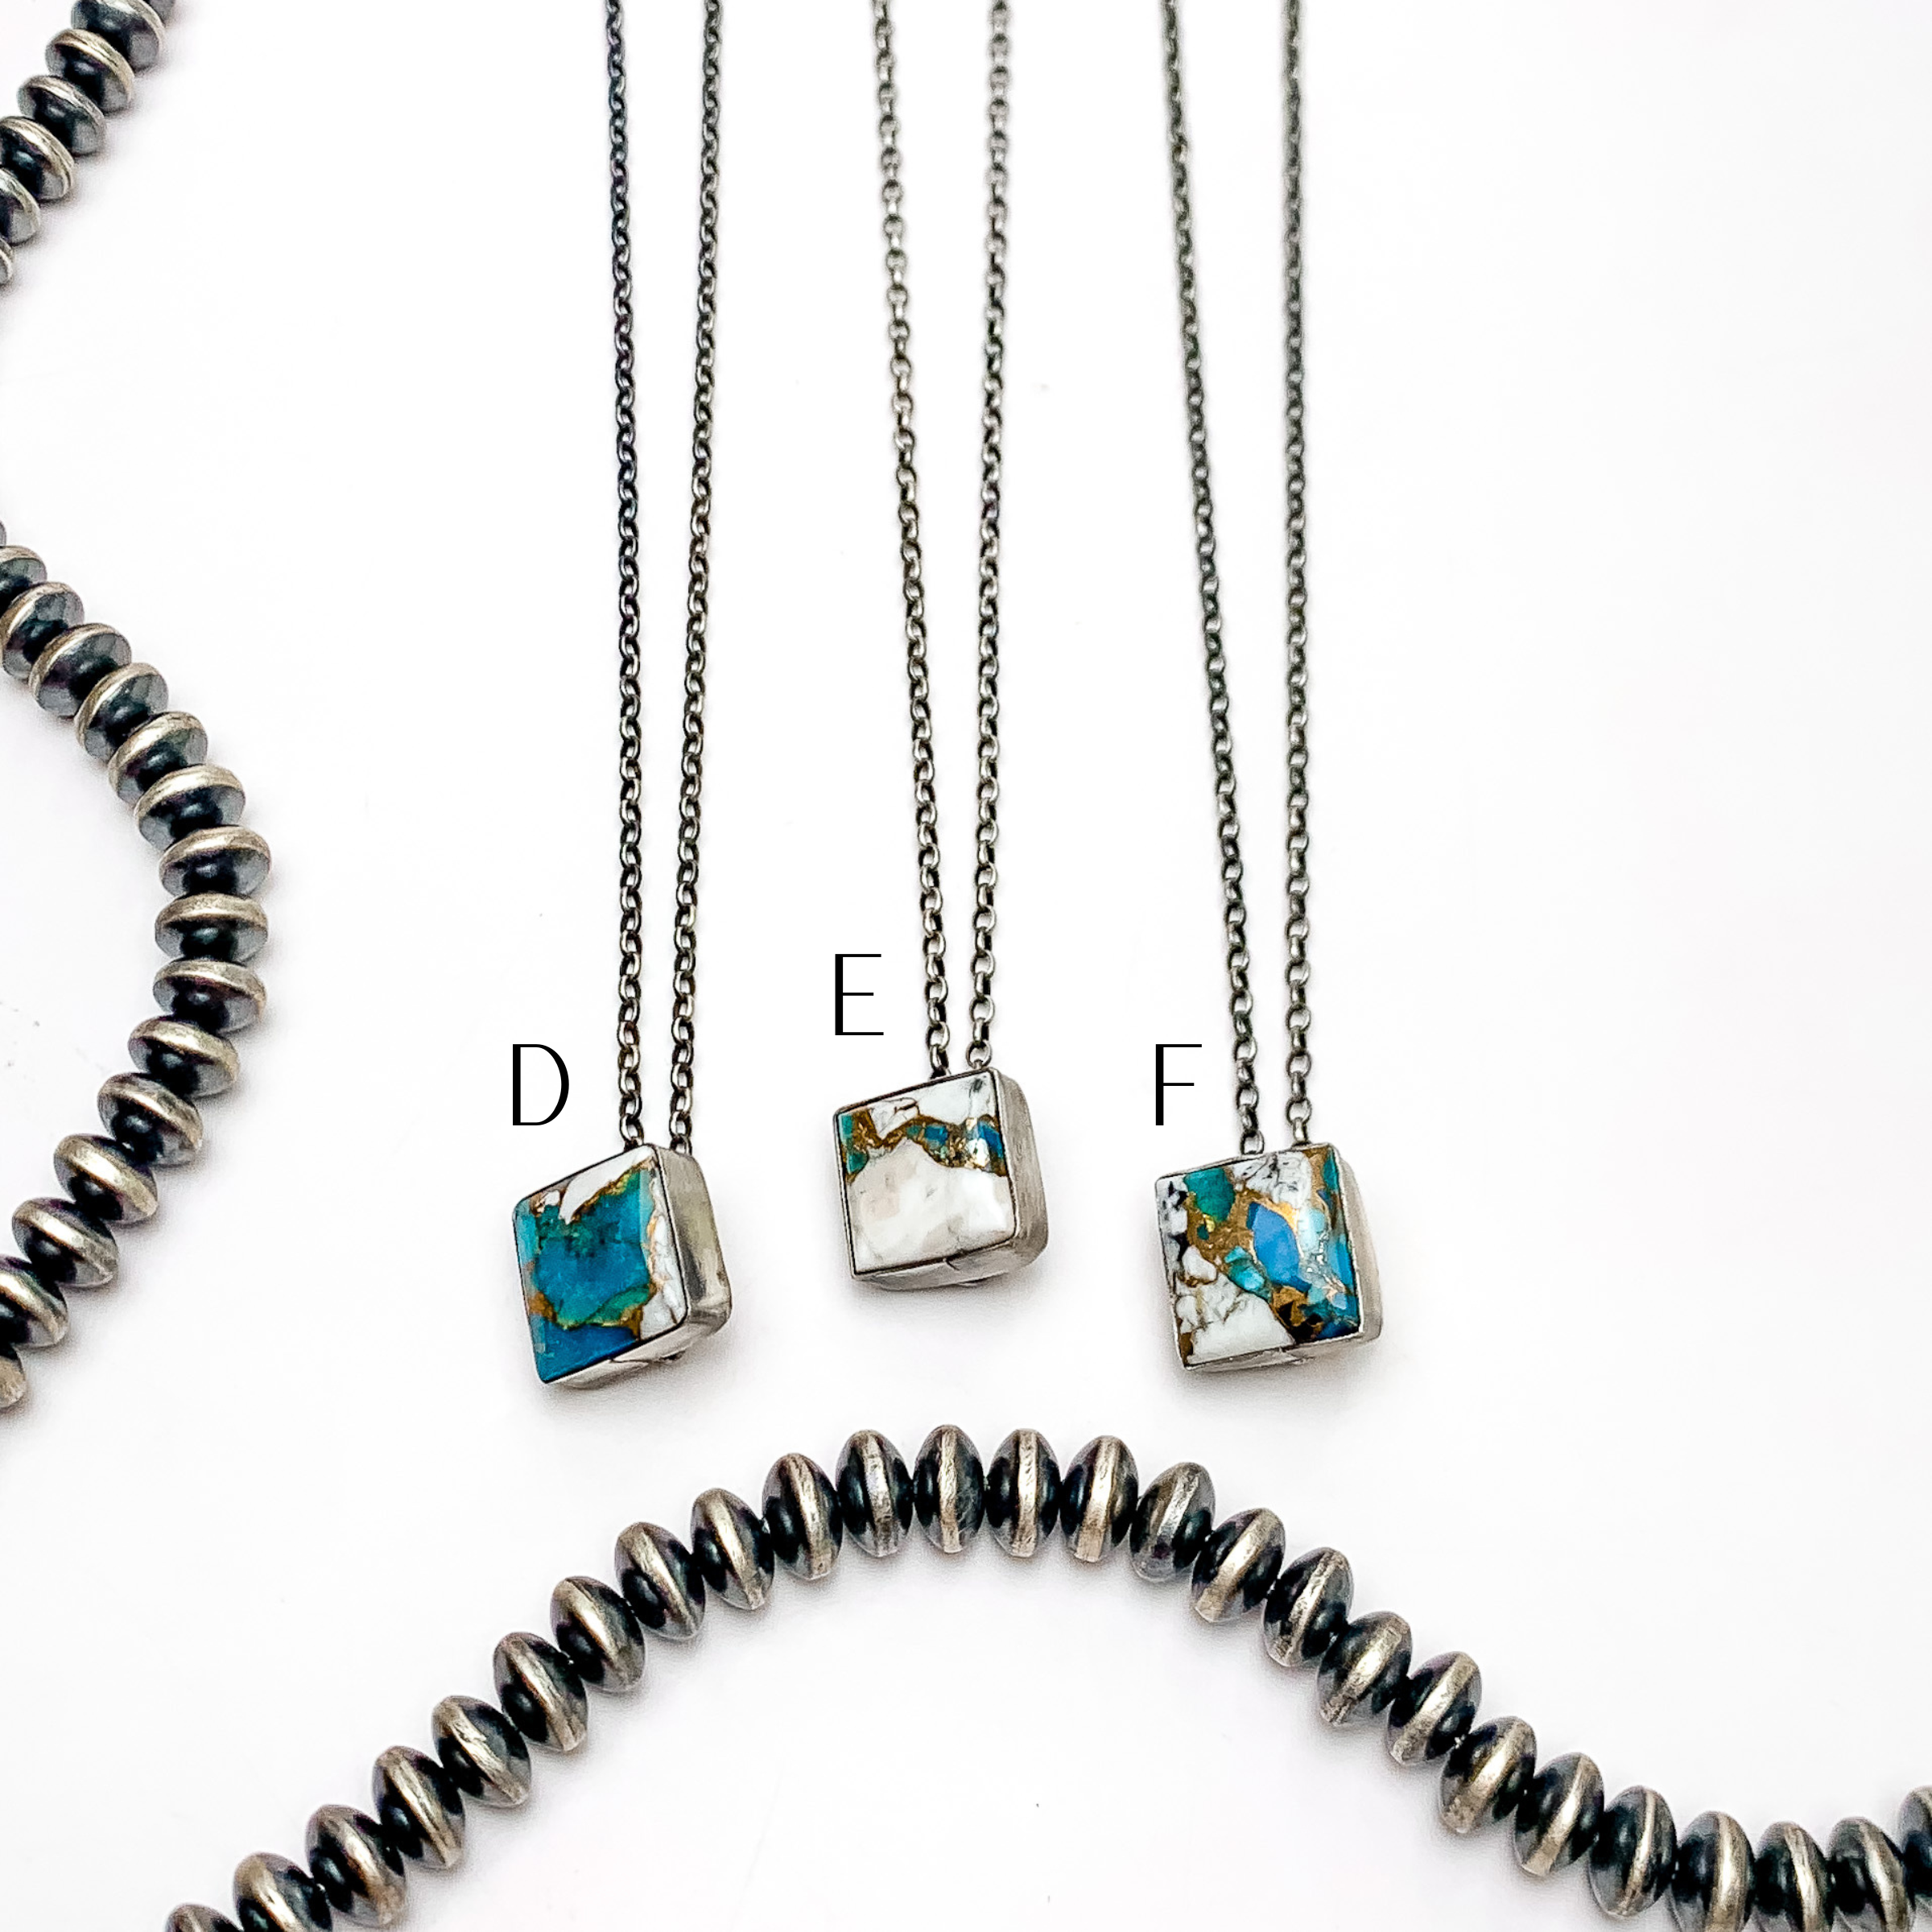 Vernon Kee | Navajo Handmade Sterling Silver Chain Necklace with Multi Spiny Turquoise Square Pendant - Giddy Up Glamour Boutique